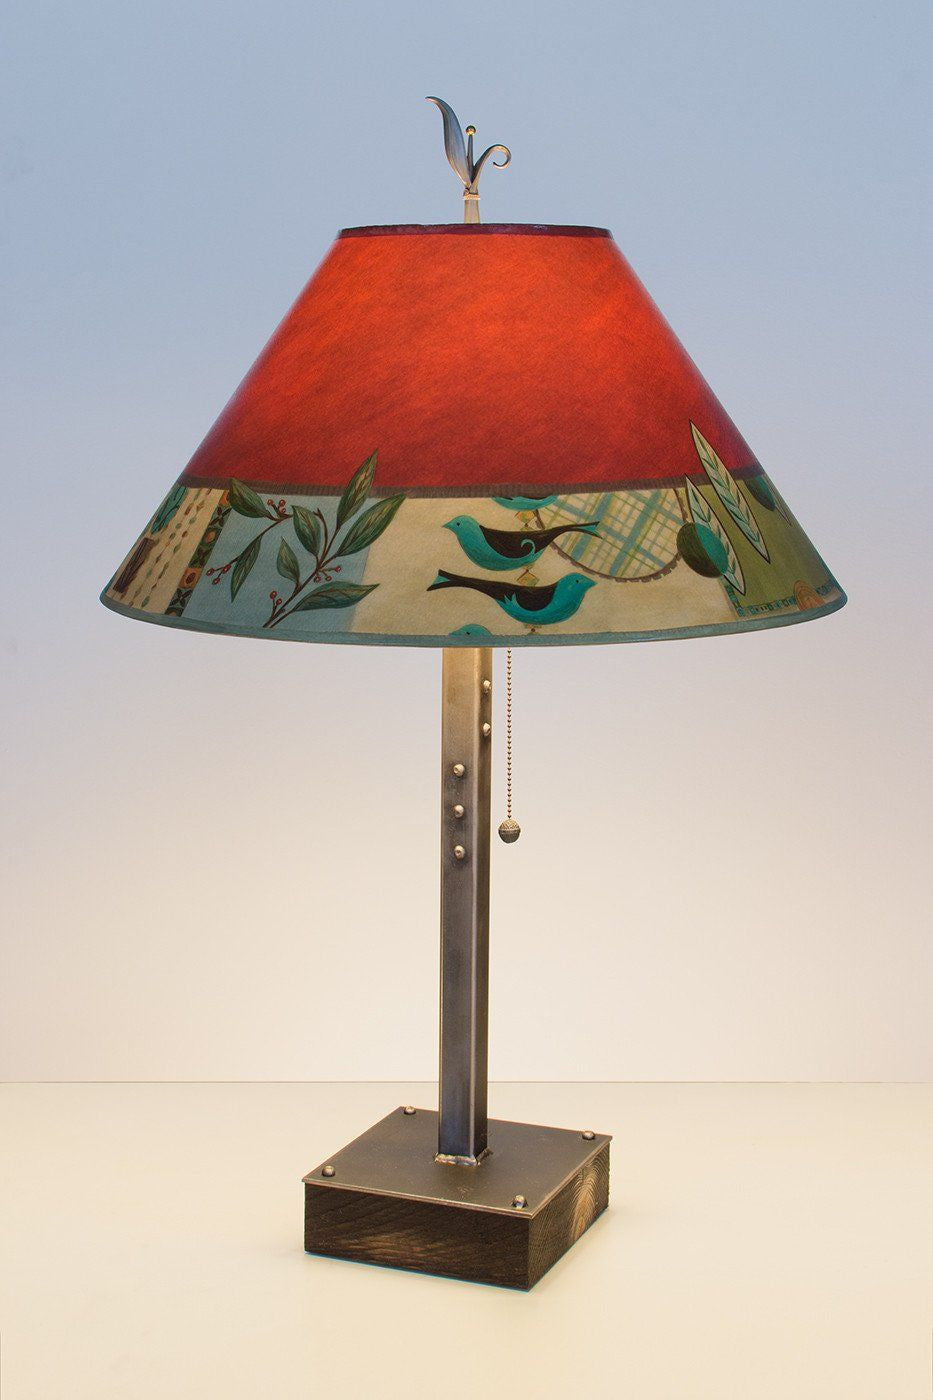 Janna Ugone & Co Table Lamps Steel Table Lamp on Wood with Large Conical Shade in New Capri